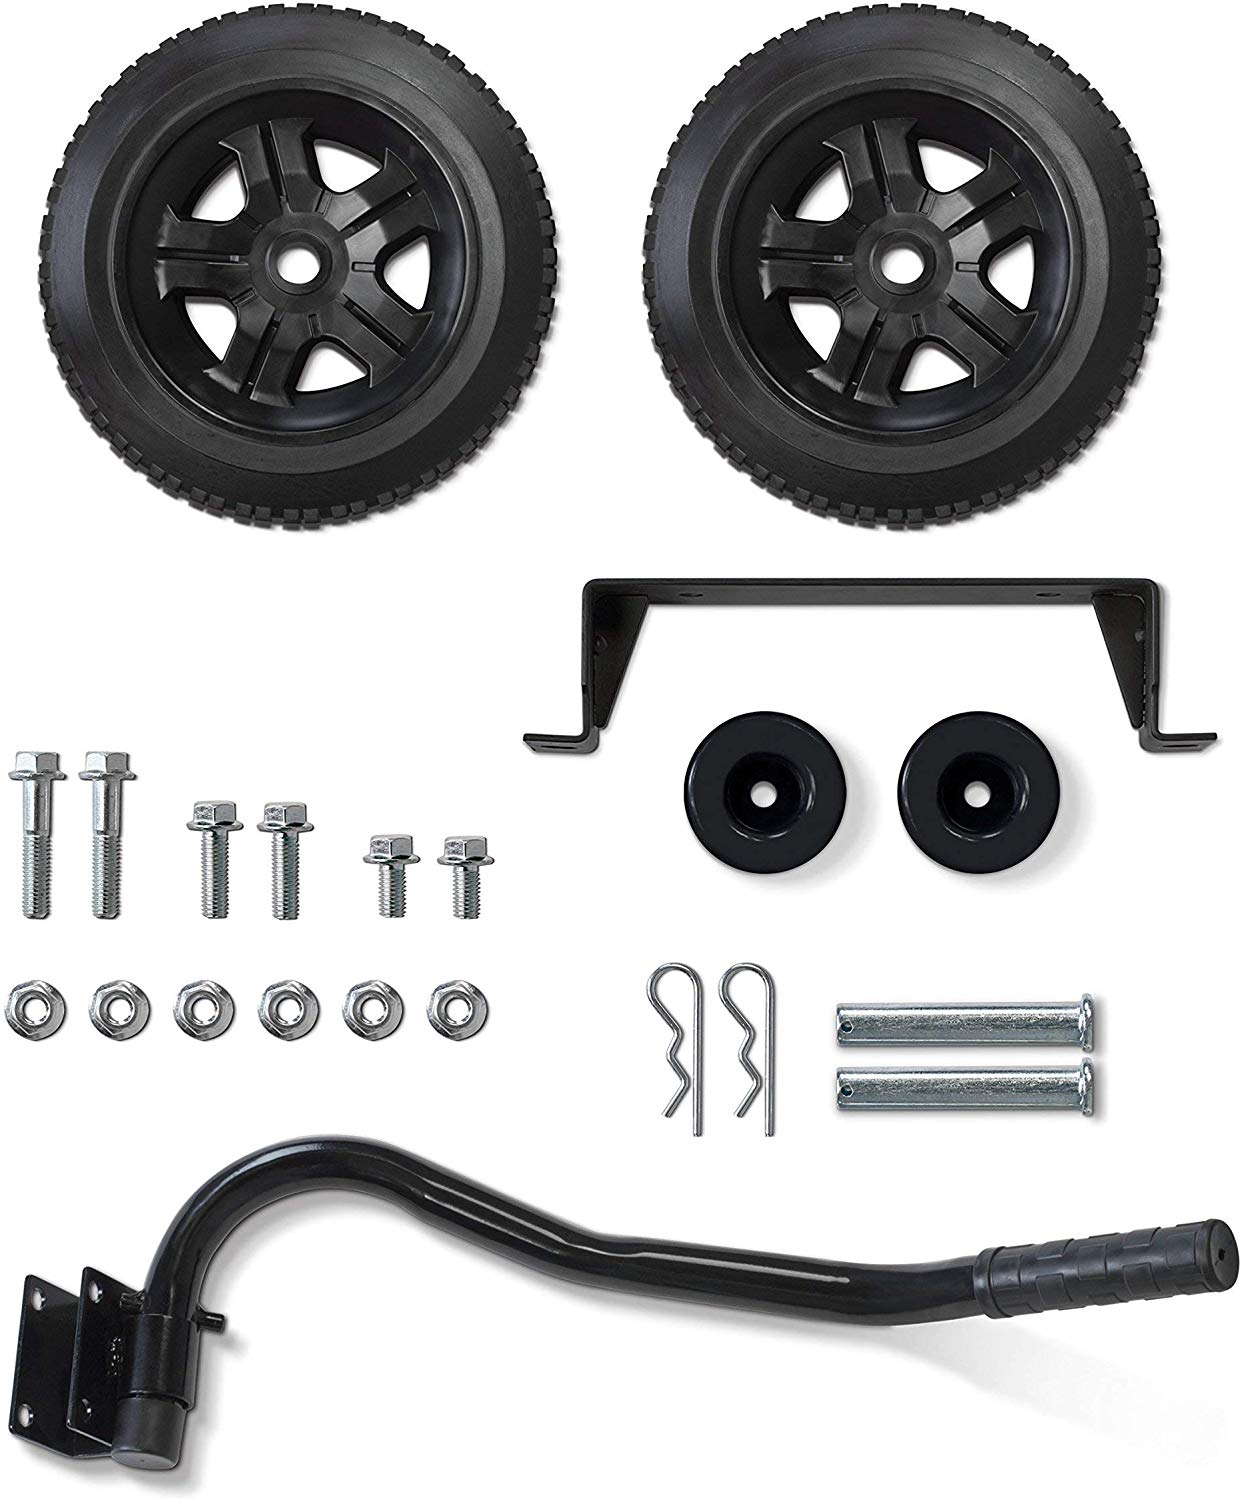 Champion Wheel Kit with Folding Handle and Never-Flat Tires